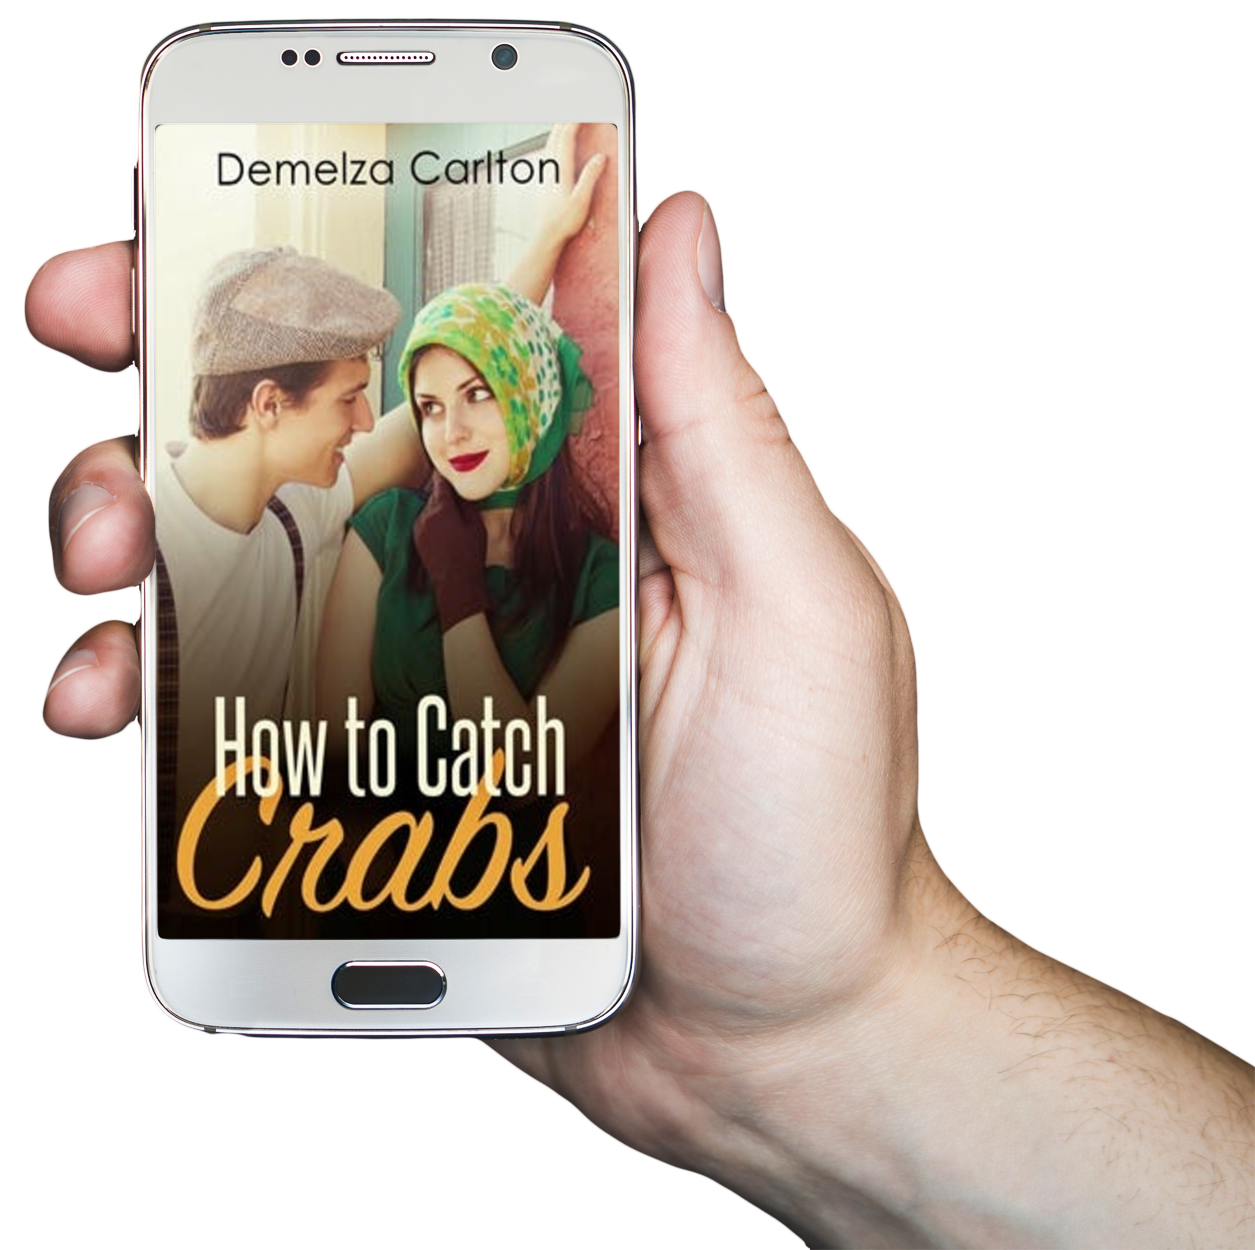 How to Catch Crabs Book 6 in the Siren of War series by USA Today Bestselling Author Demelza Carlton